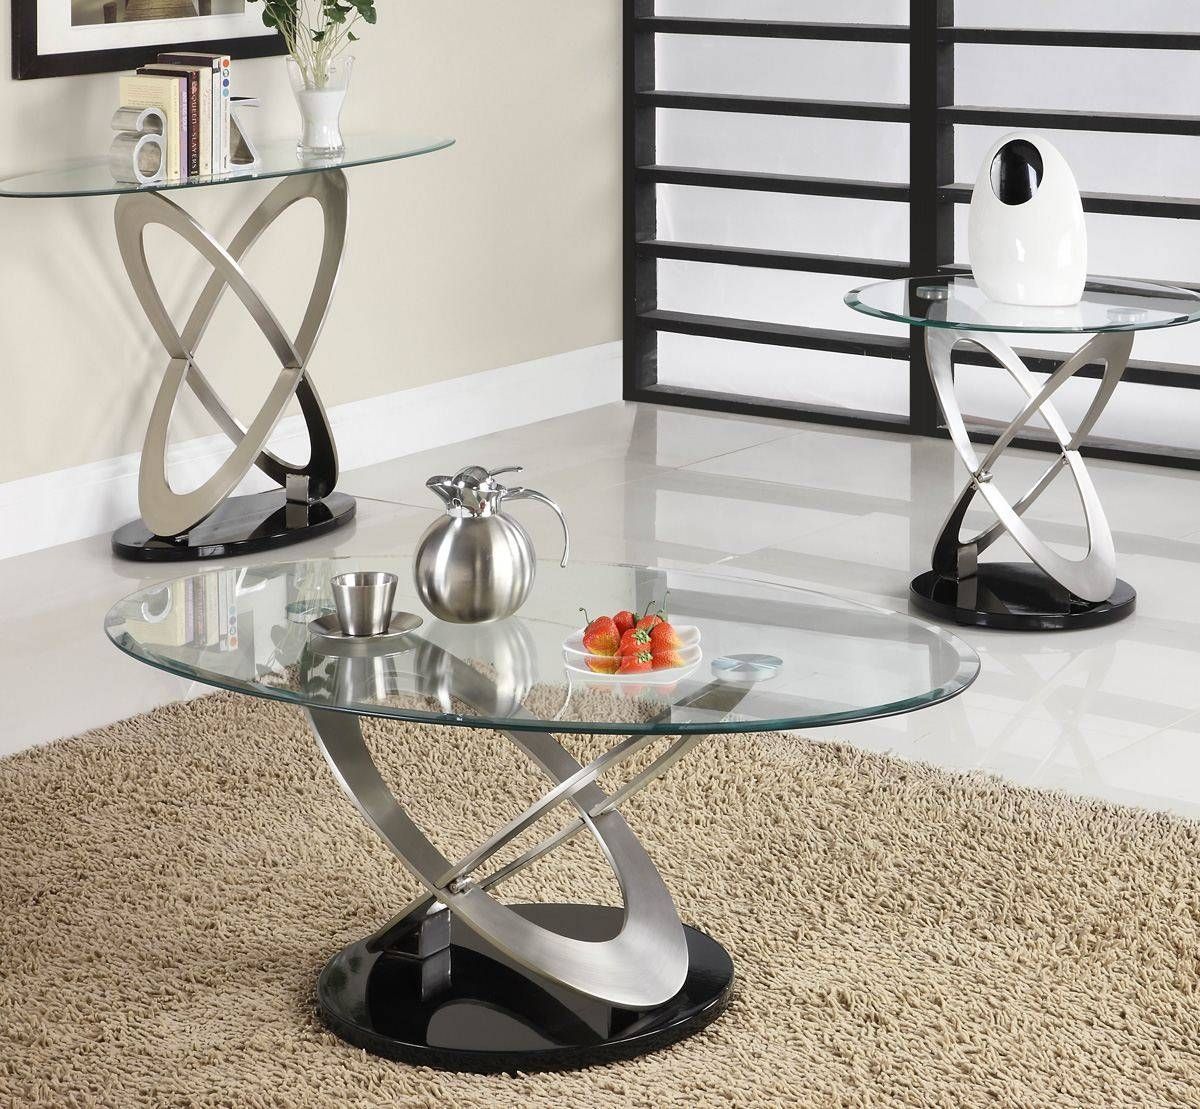 Glass Sofa Table For A Great Living Room Decor Ideas – Theydesign With Chrome Sofa Tables (View 15 of 15)